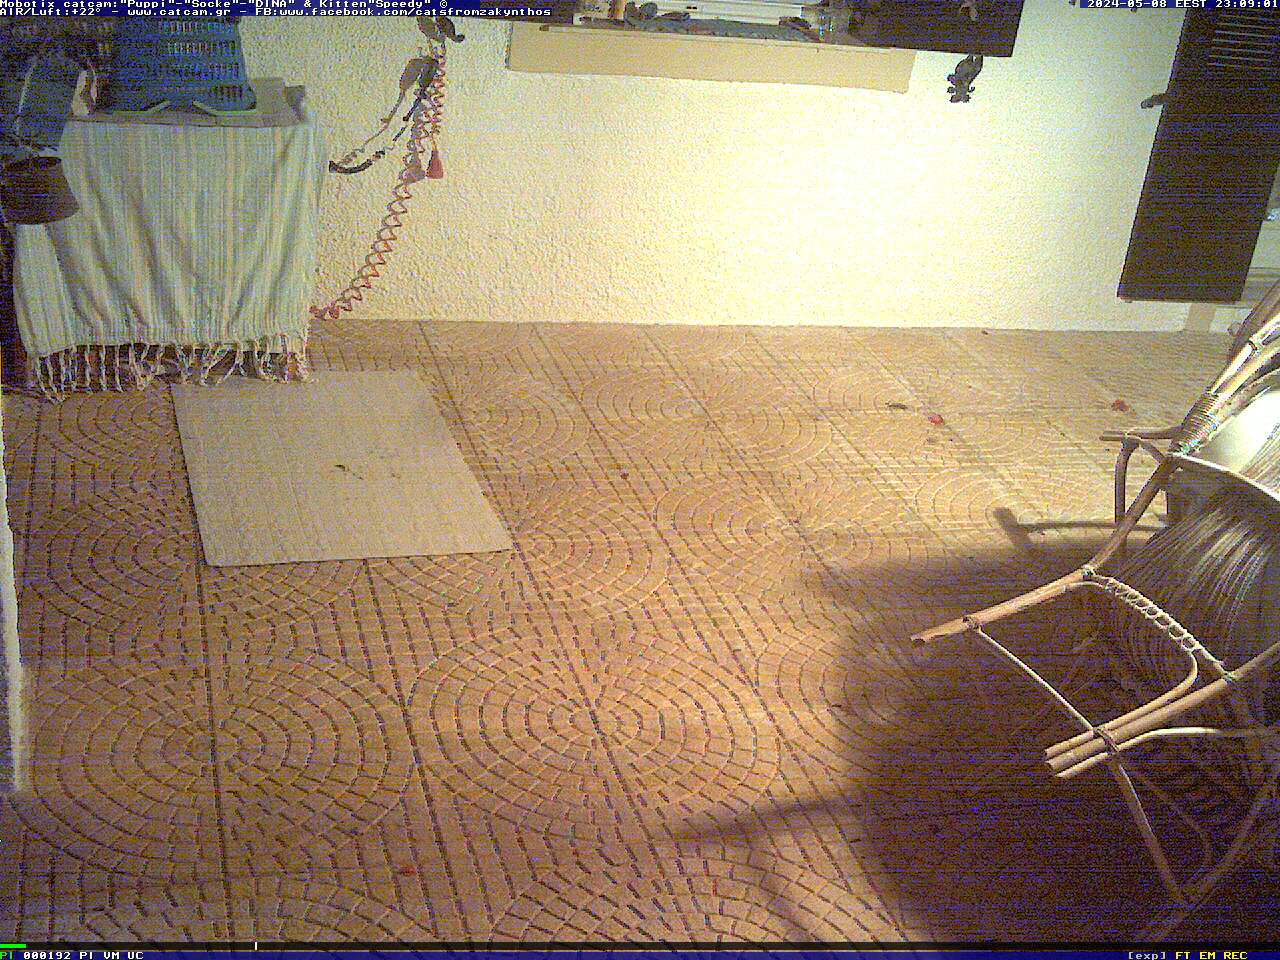 The first CatCam from Greece